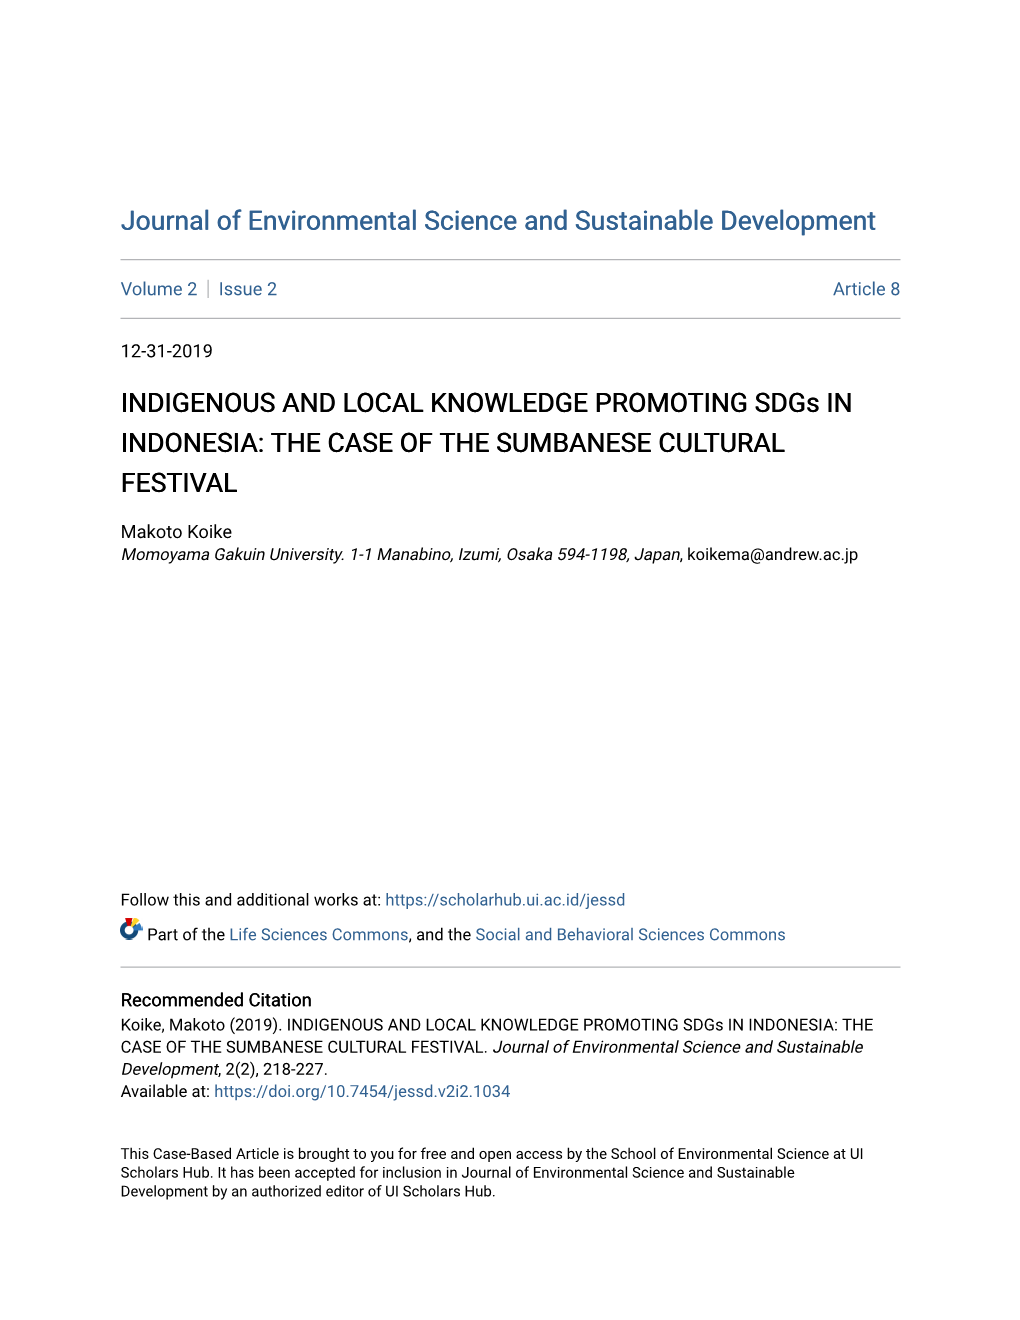 INDIGENOUS and LOCAL KNOWLEDGE PROMOTING Sdgs in INDONESIA: the CASE of the SUMBANESE CULTURAL FESTIVAL